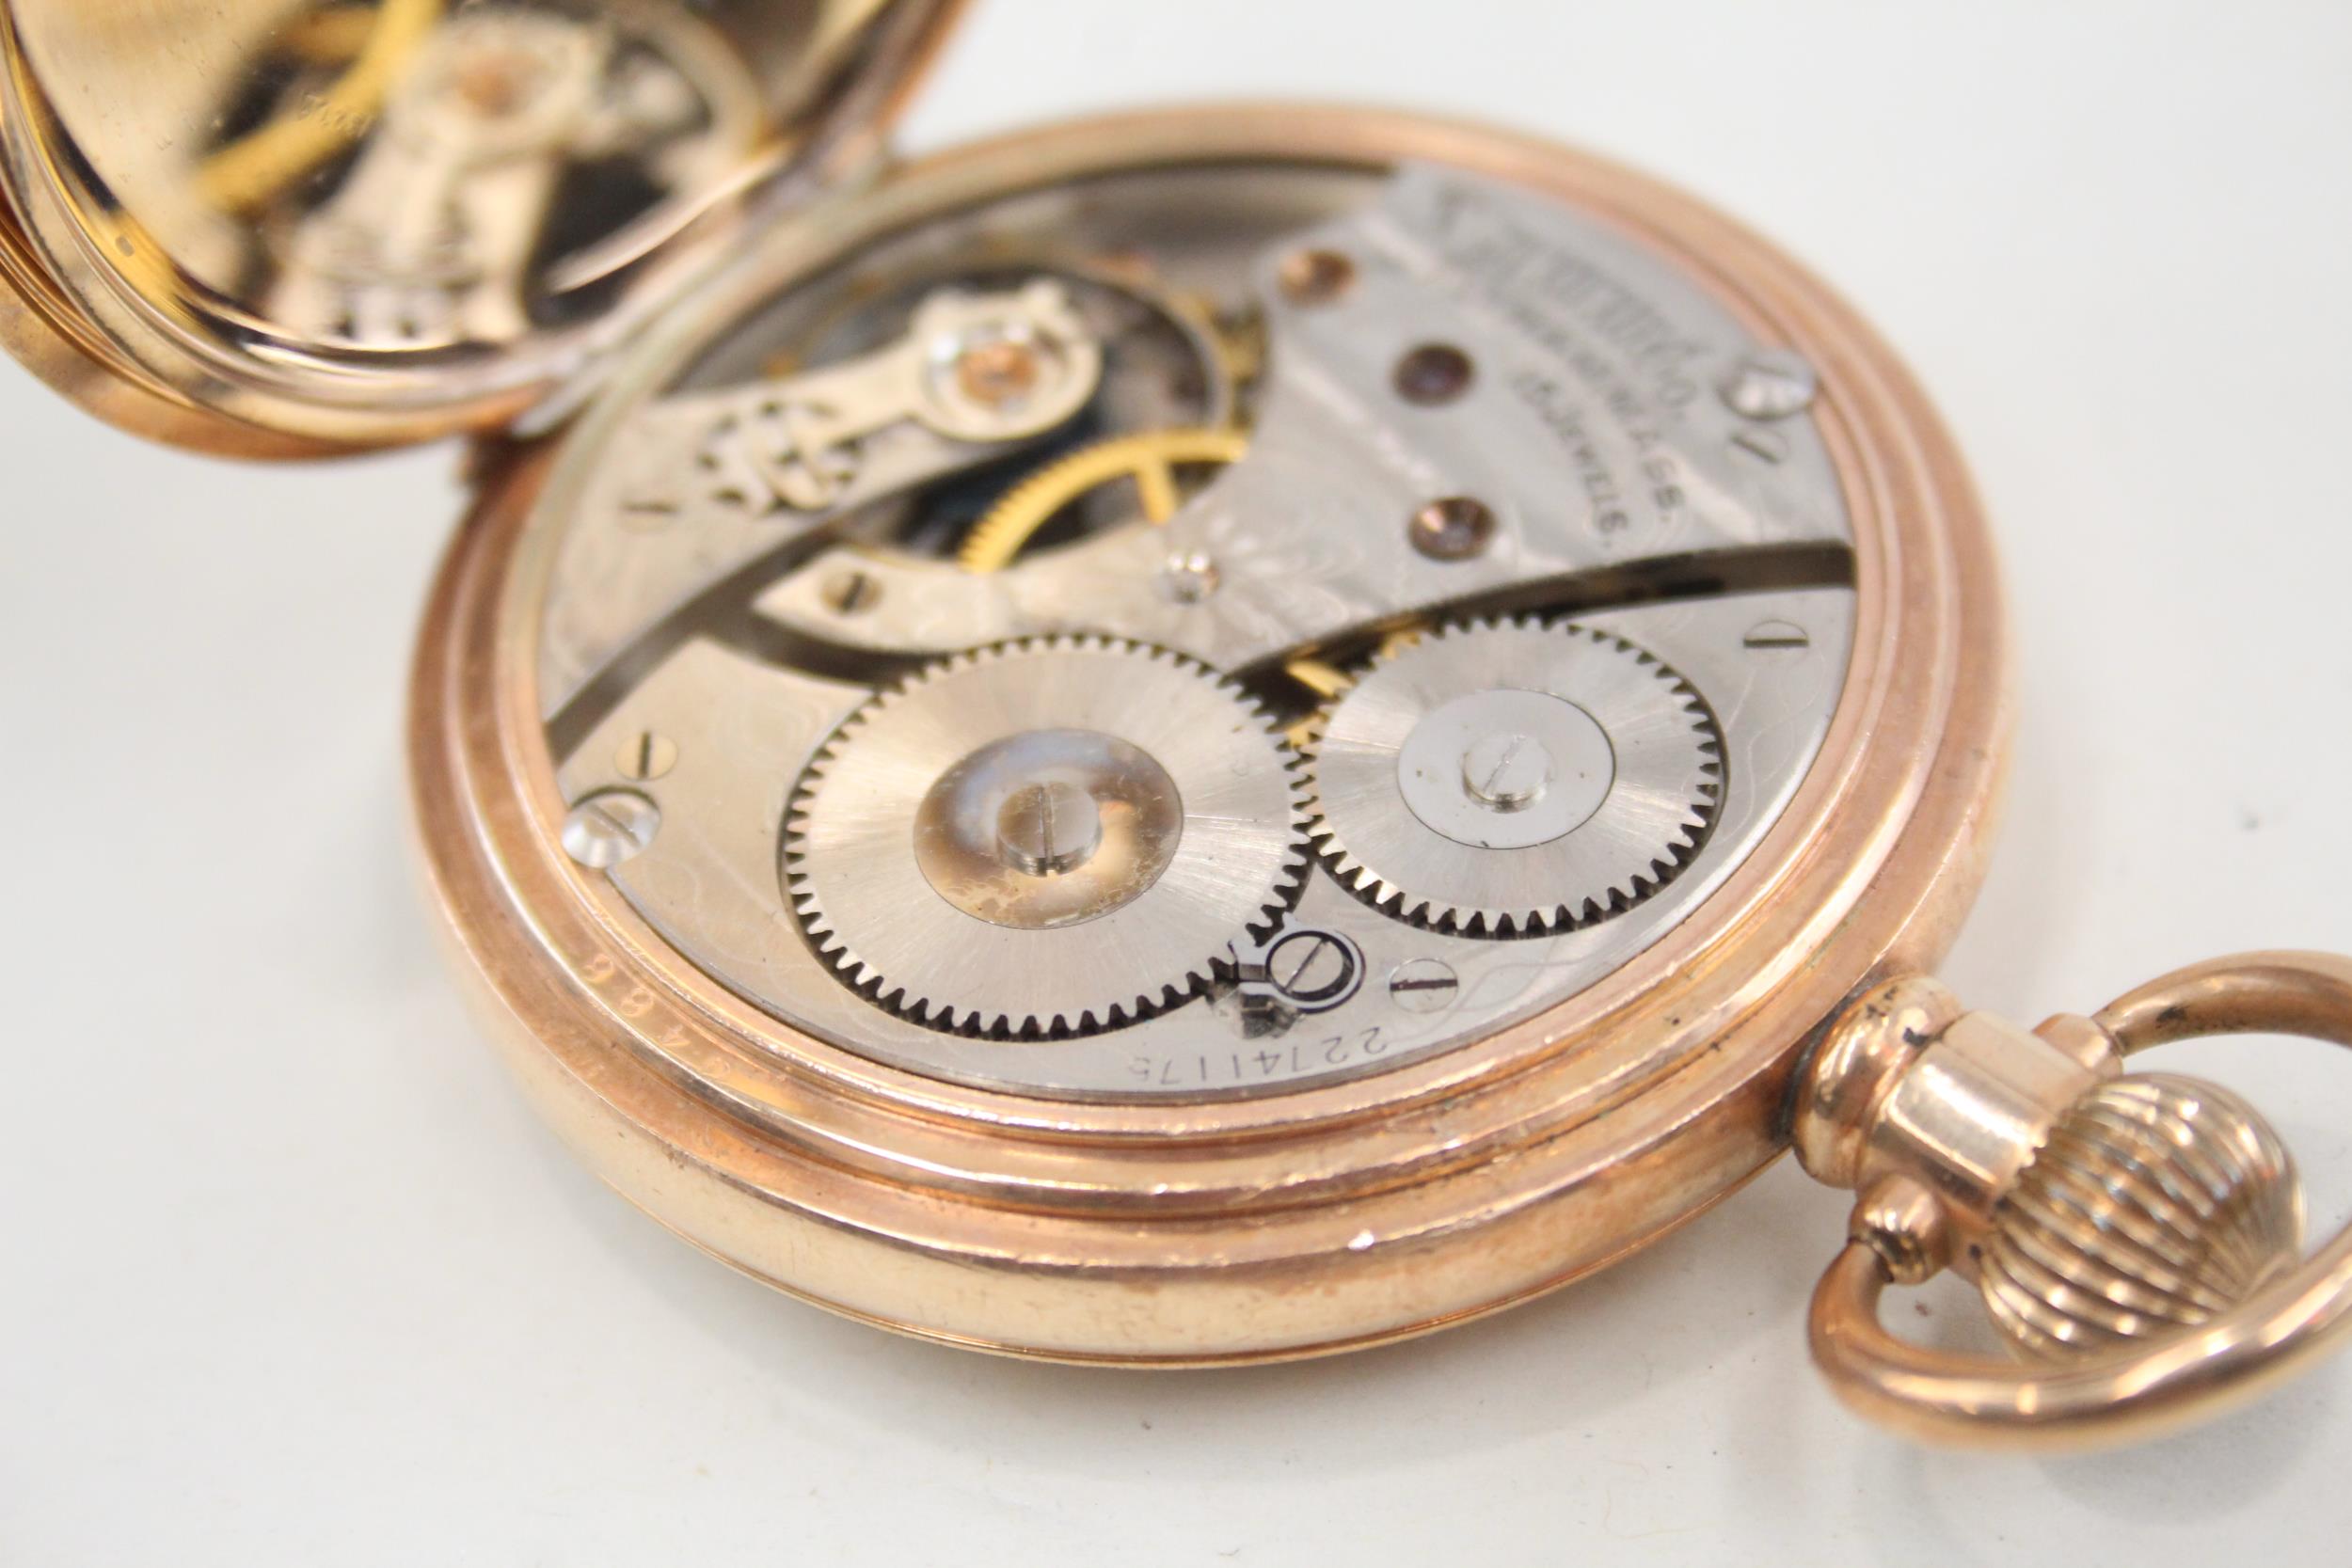 Waltham Full Hunter Rolled Gold Pocket Watch Hand-Wind WORKING - Waltham Full Hunter Rolled Gold - Image 4 of 5